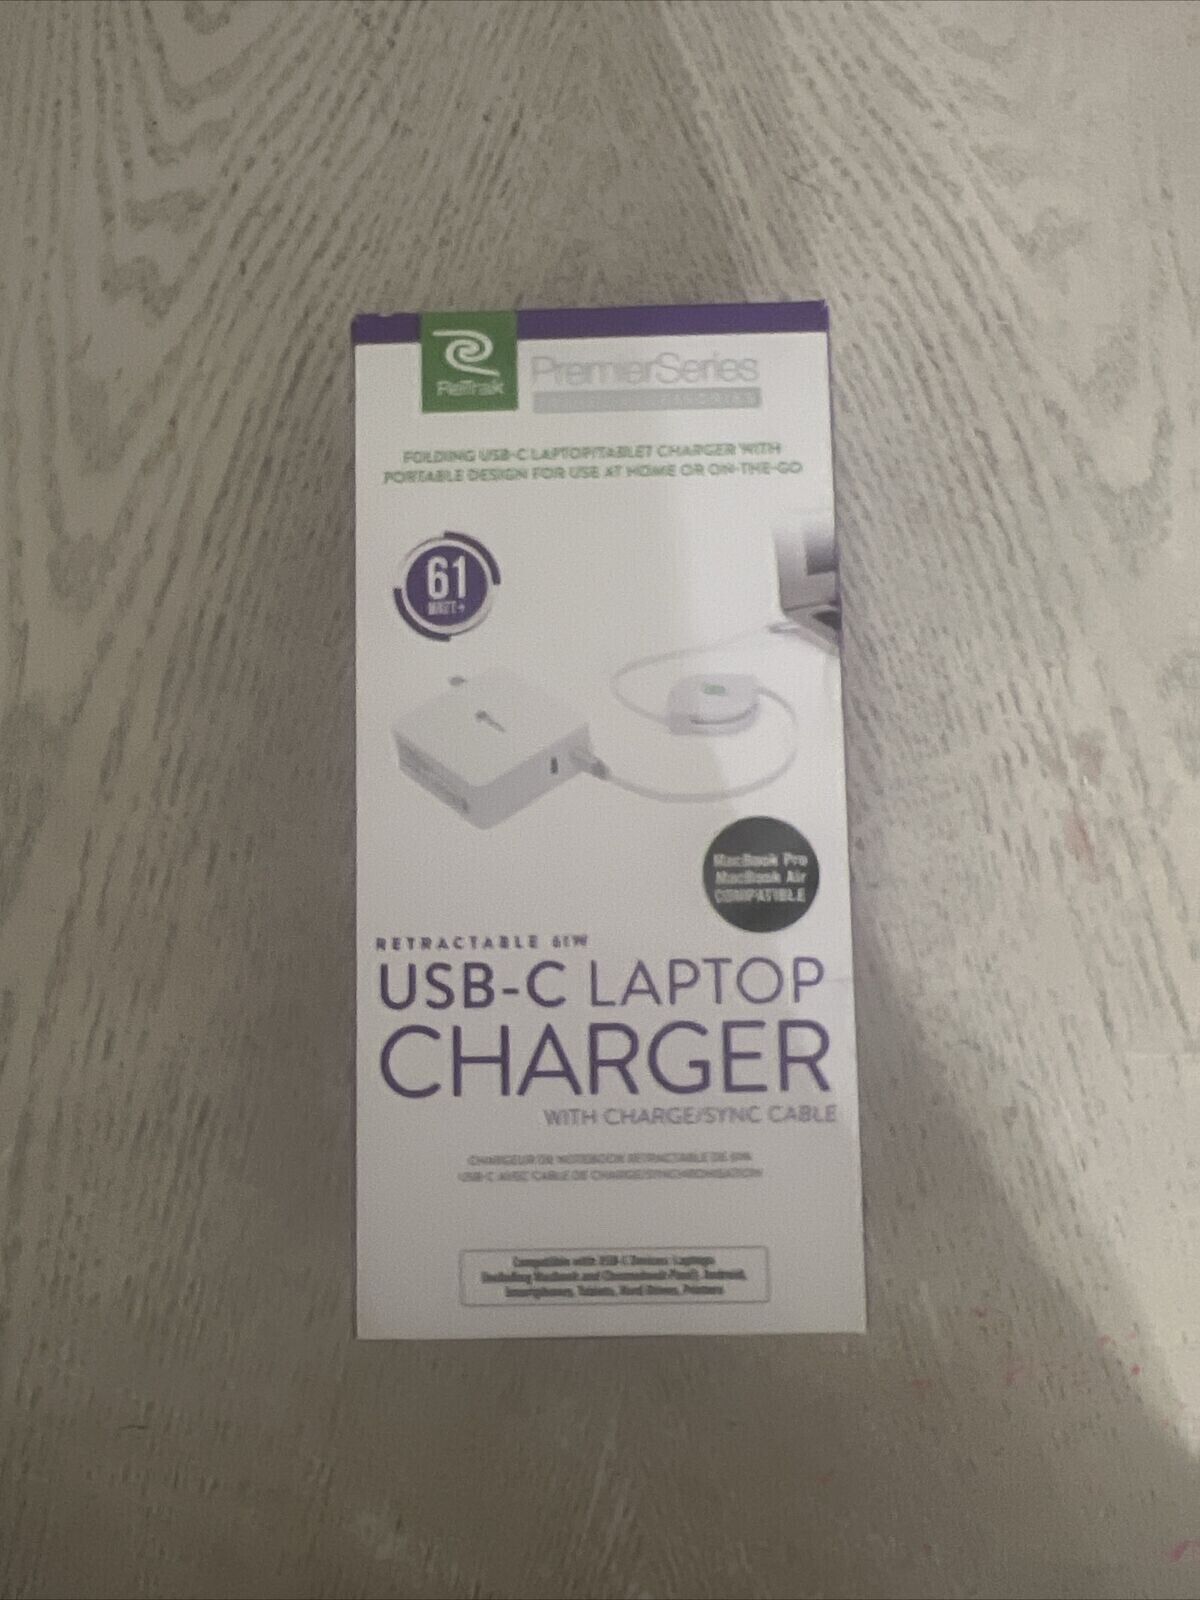 Retrak USB-C Laptop Charger | 61W Retractable Charger Cable, Notebook